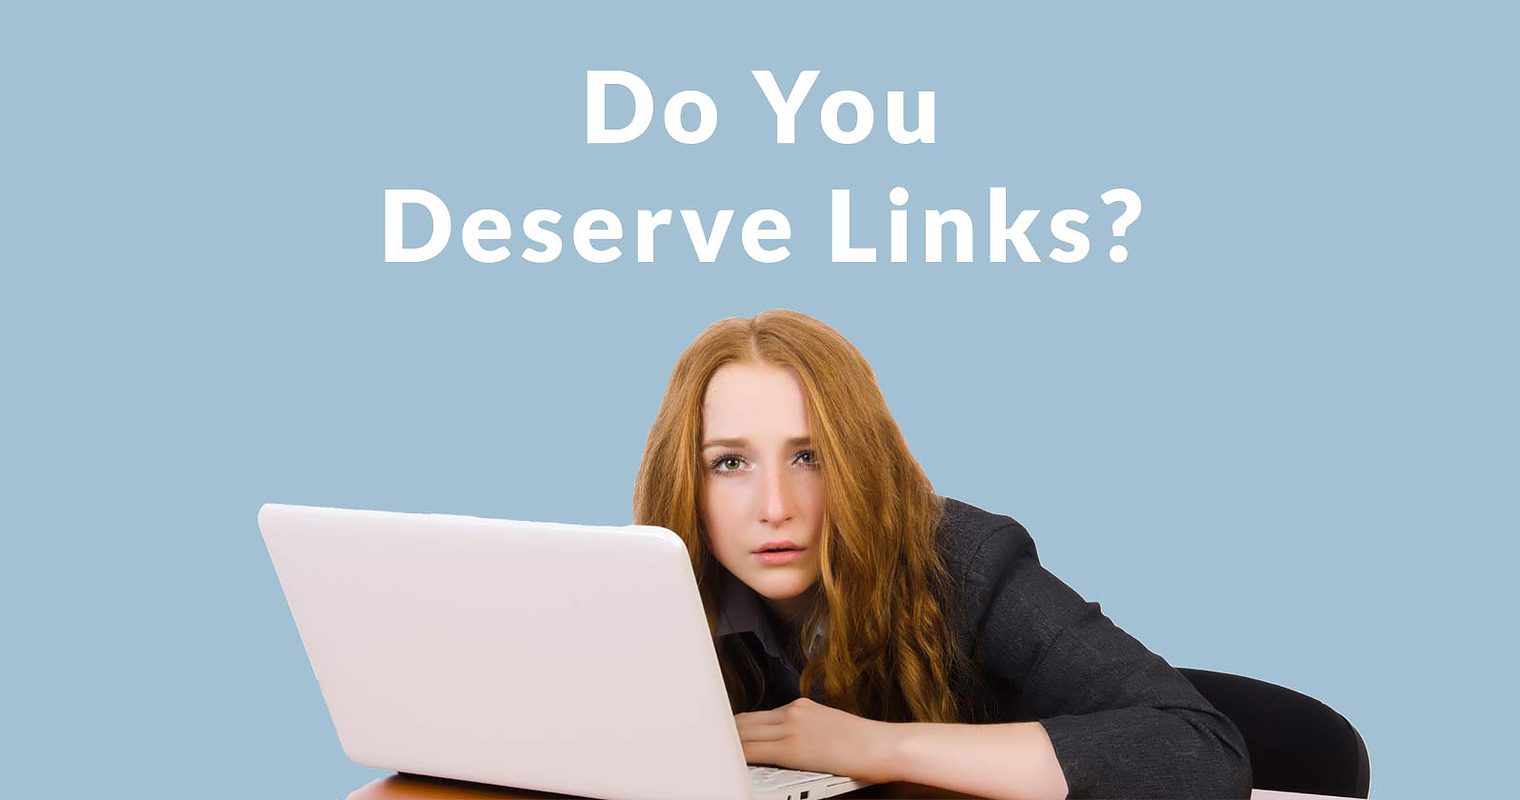 Google Says You Are Not Entitled to Links